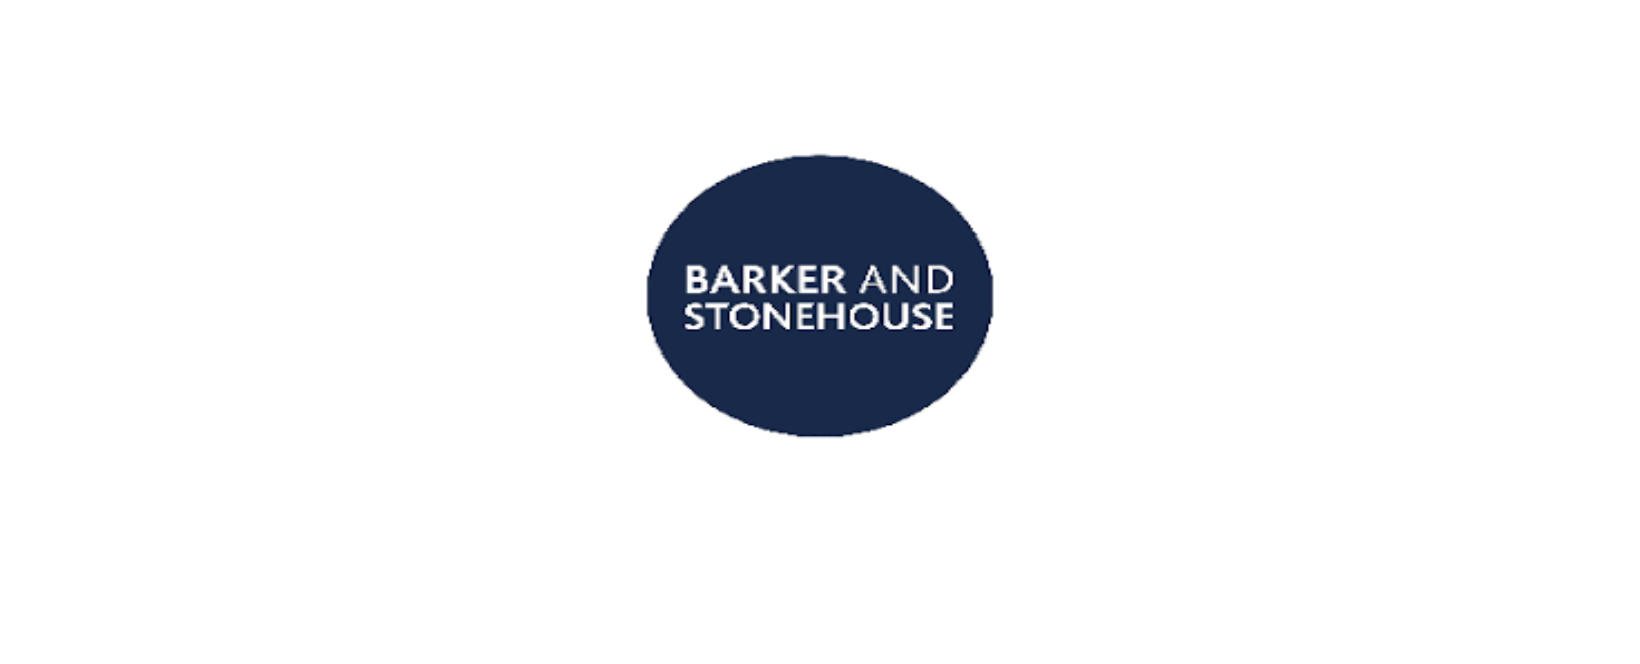 Barker & Stonehouse Discount Code 2022